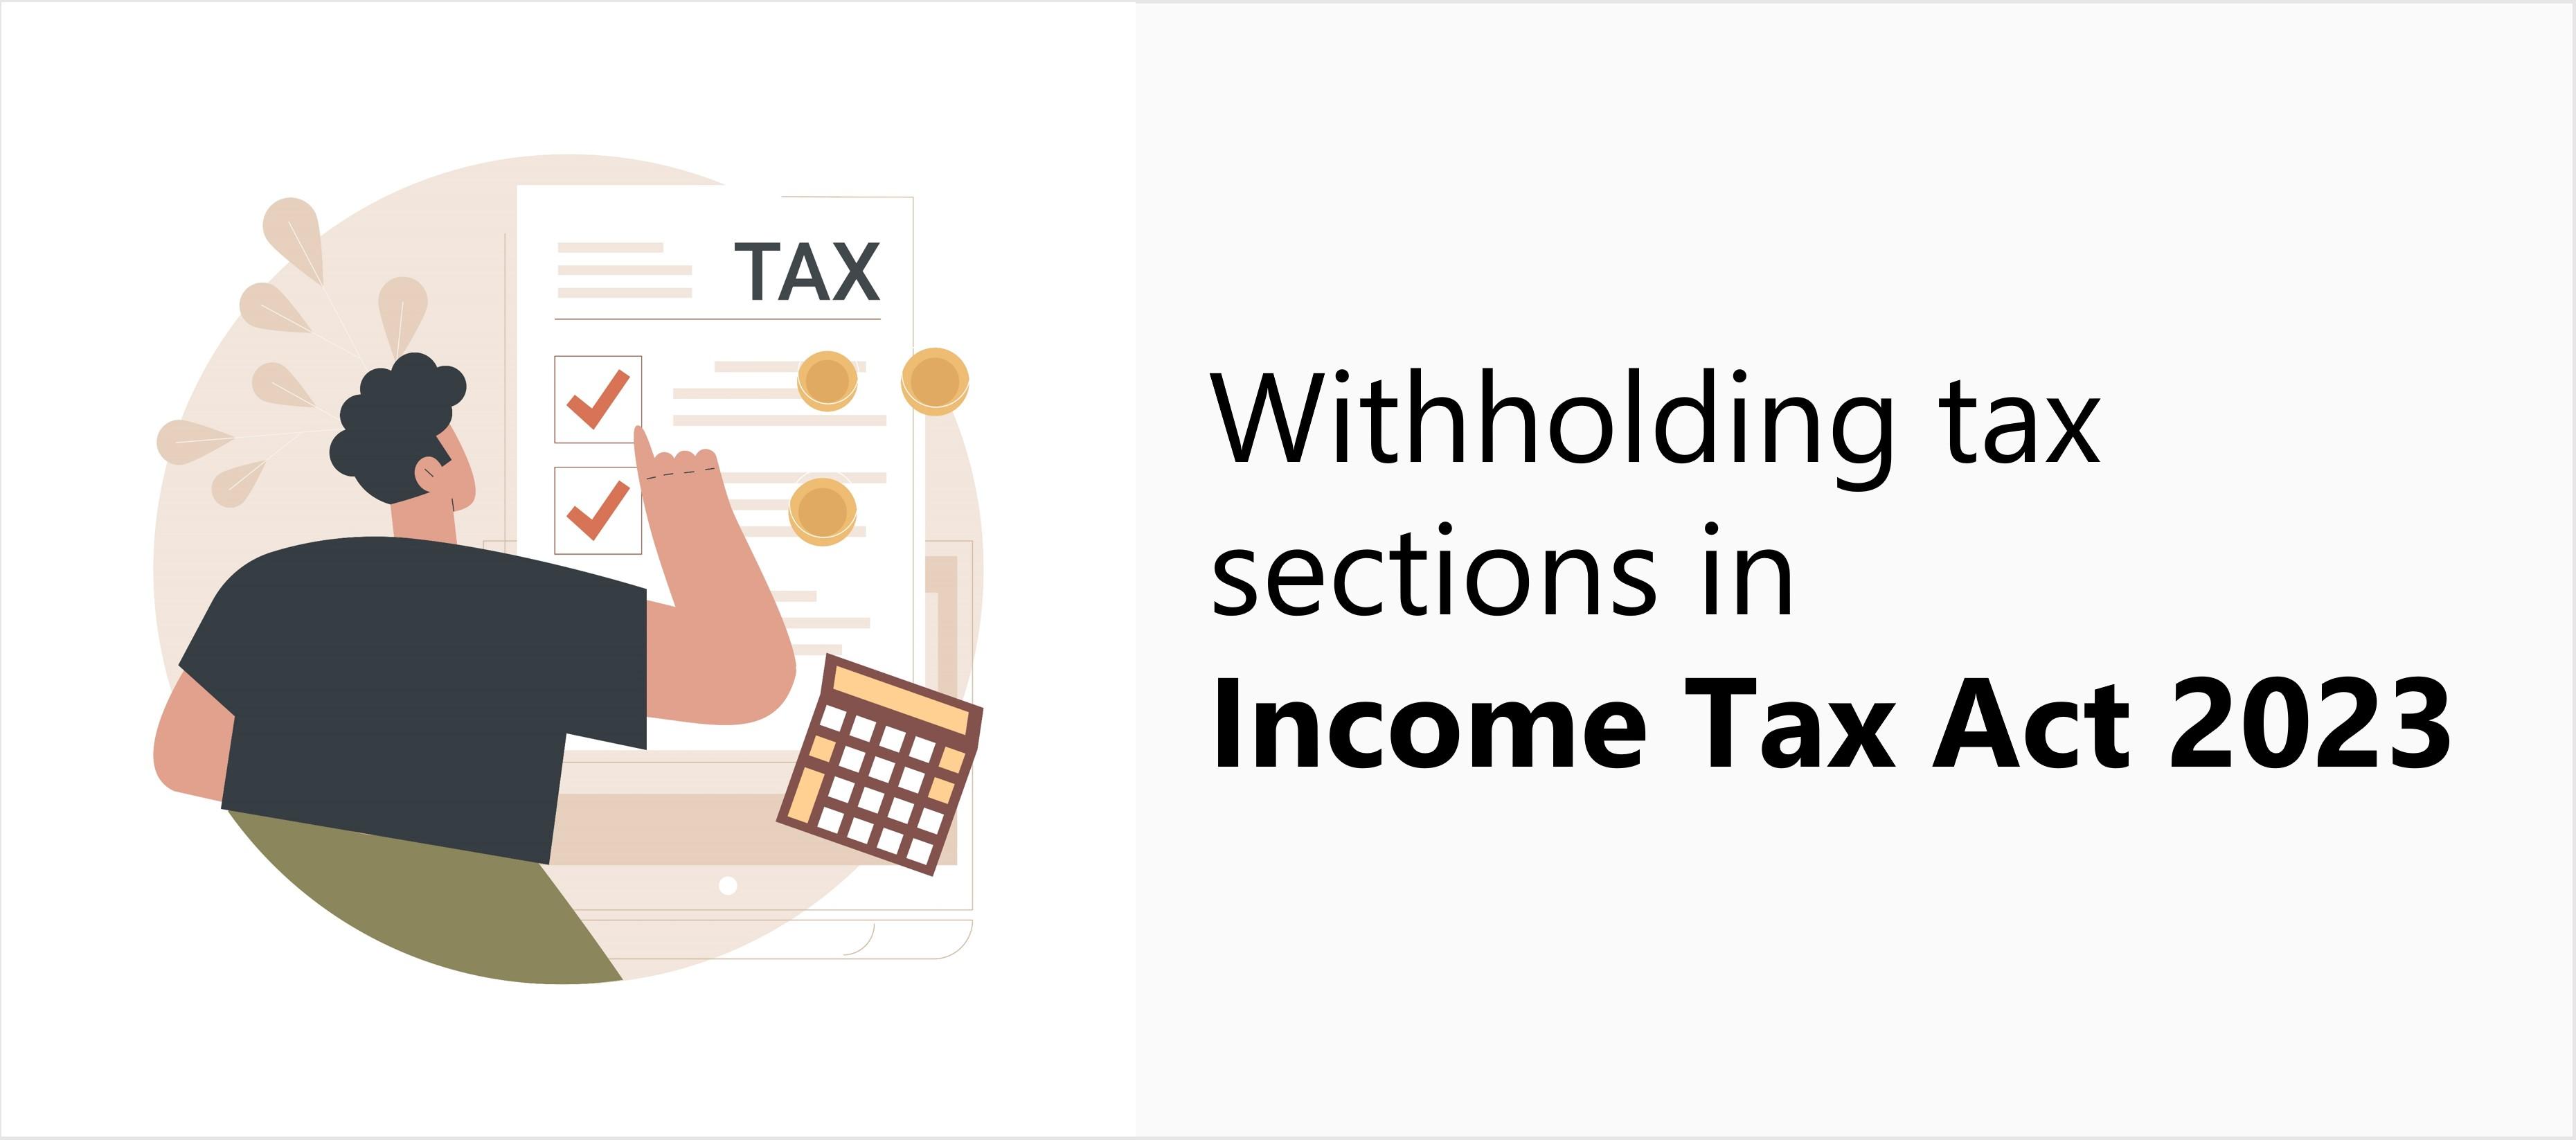 Withholding tax sections in ITA 2023